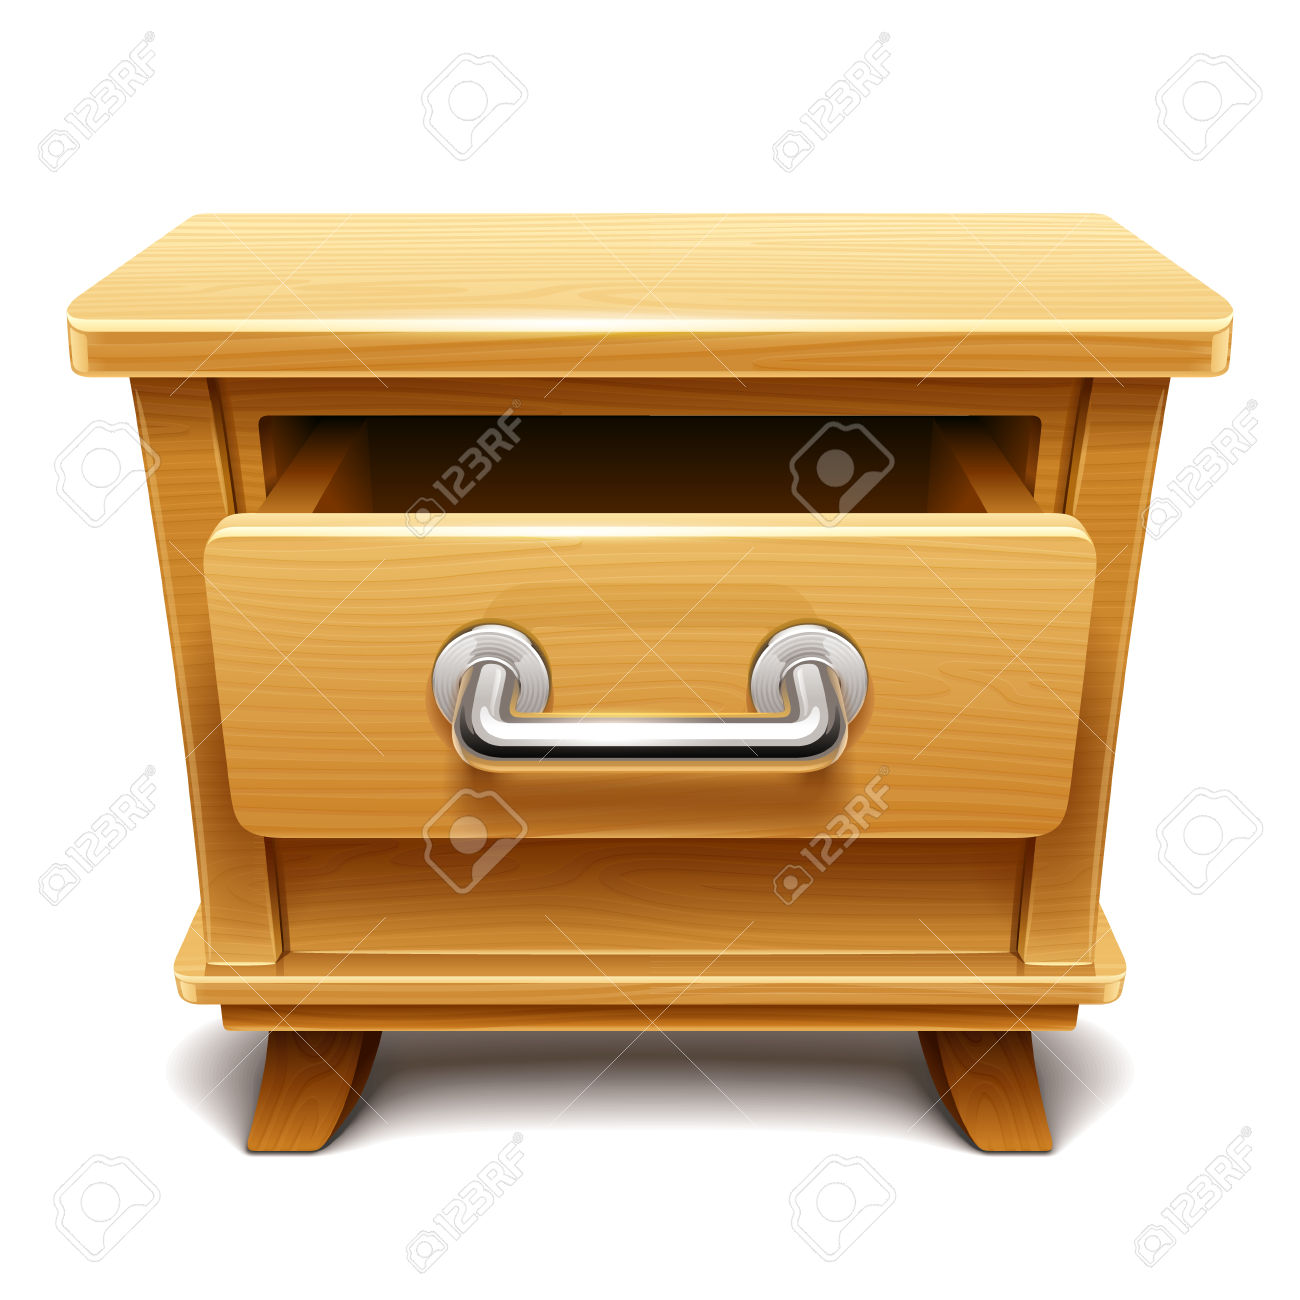 6,560 Drawer Stock Vector Illustration And Royalty Free Drawer Clipart.